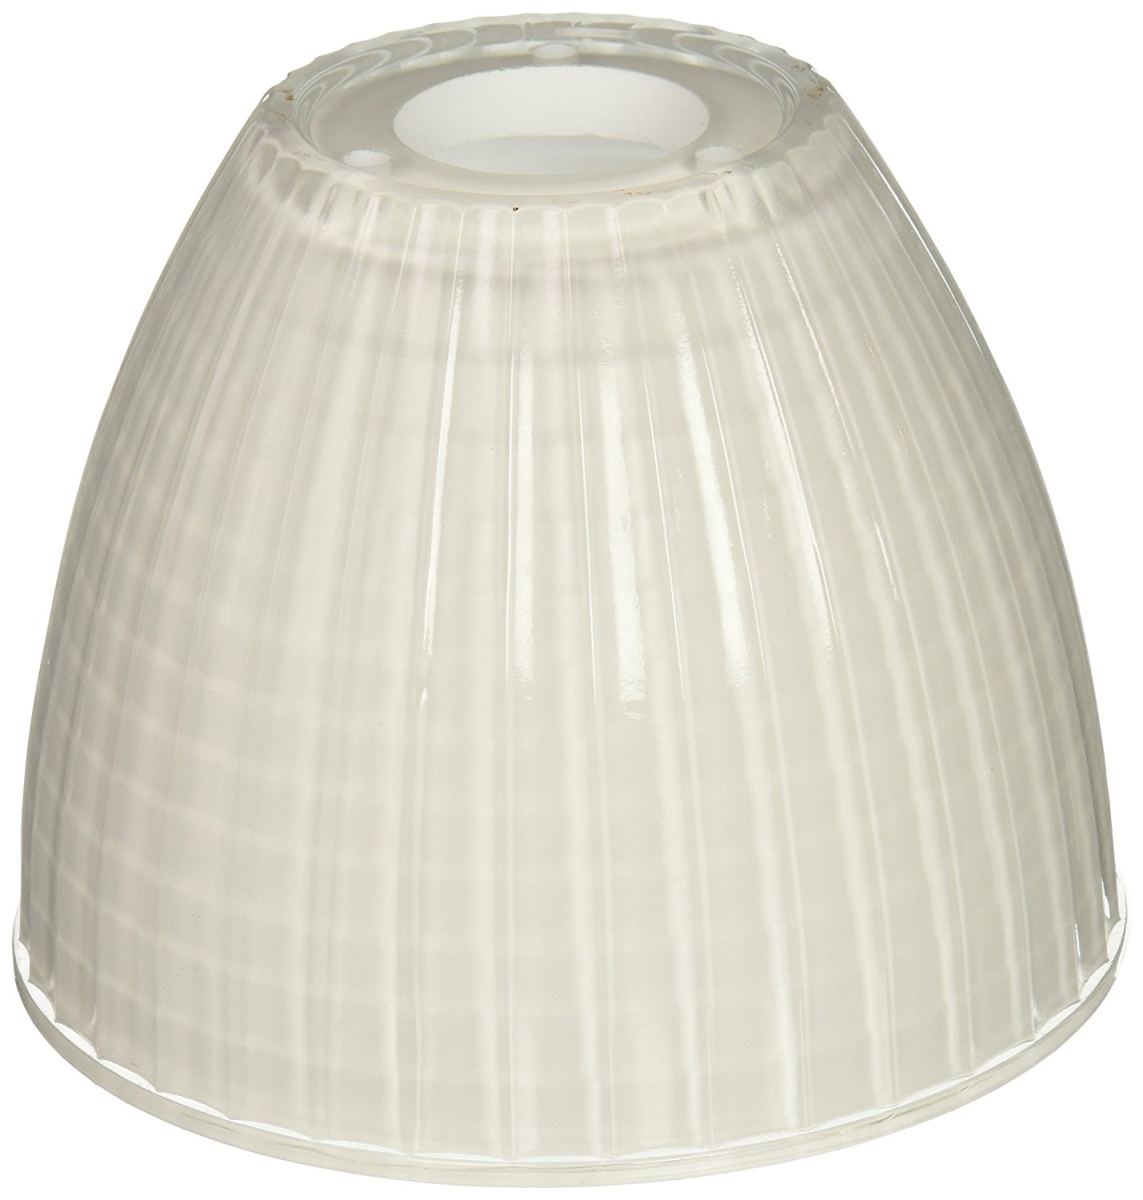 Jesco Lighting Ap06s01wh 6 In. Aperture Pendant Or Wall Sconce, White